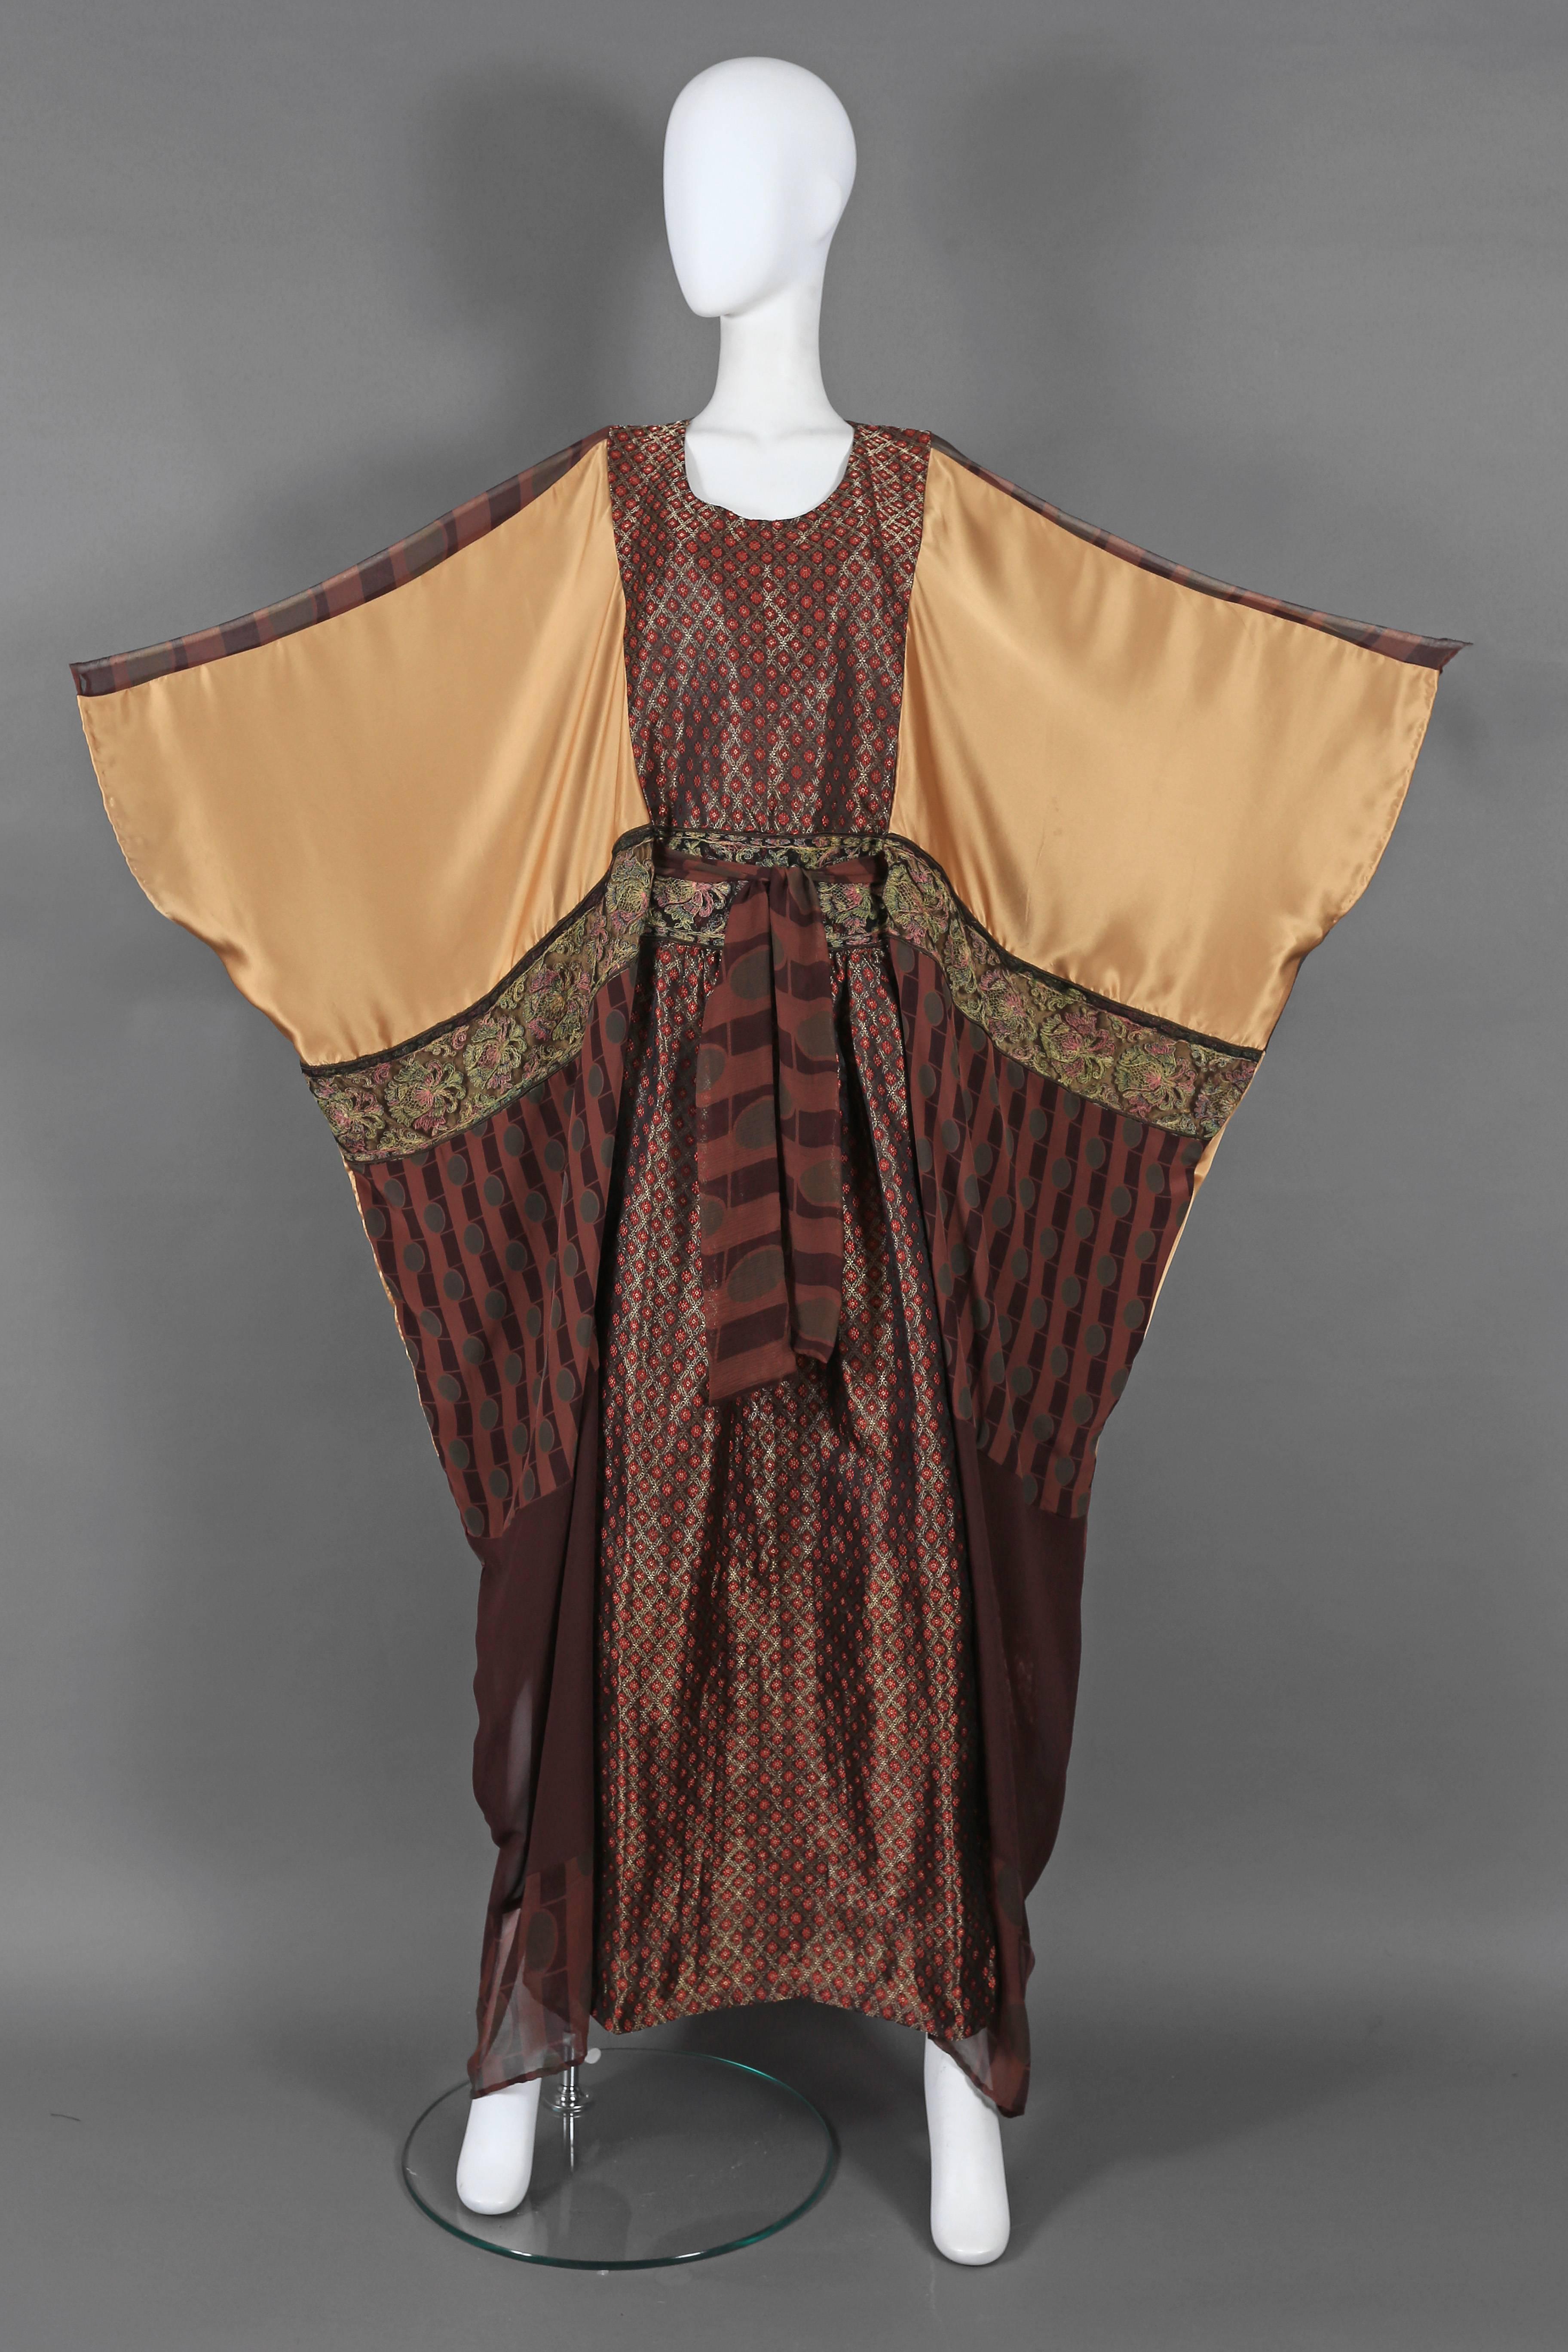 An exceptional and rare Thea Porter Couture evening caftan from the 1970s. The caftan features a beautiful Indian silk brocade fabric, three-dimensional lace, gold-tone 100% silk and a splendid art deco pattern printed on silk chiffon.  

Thea